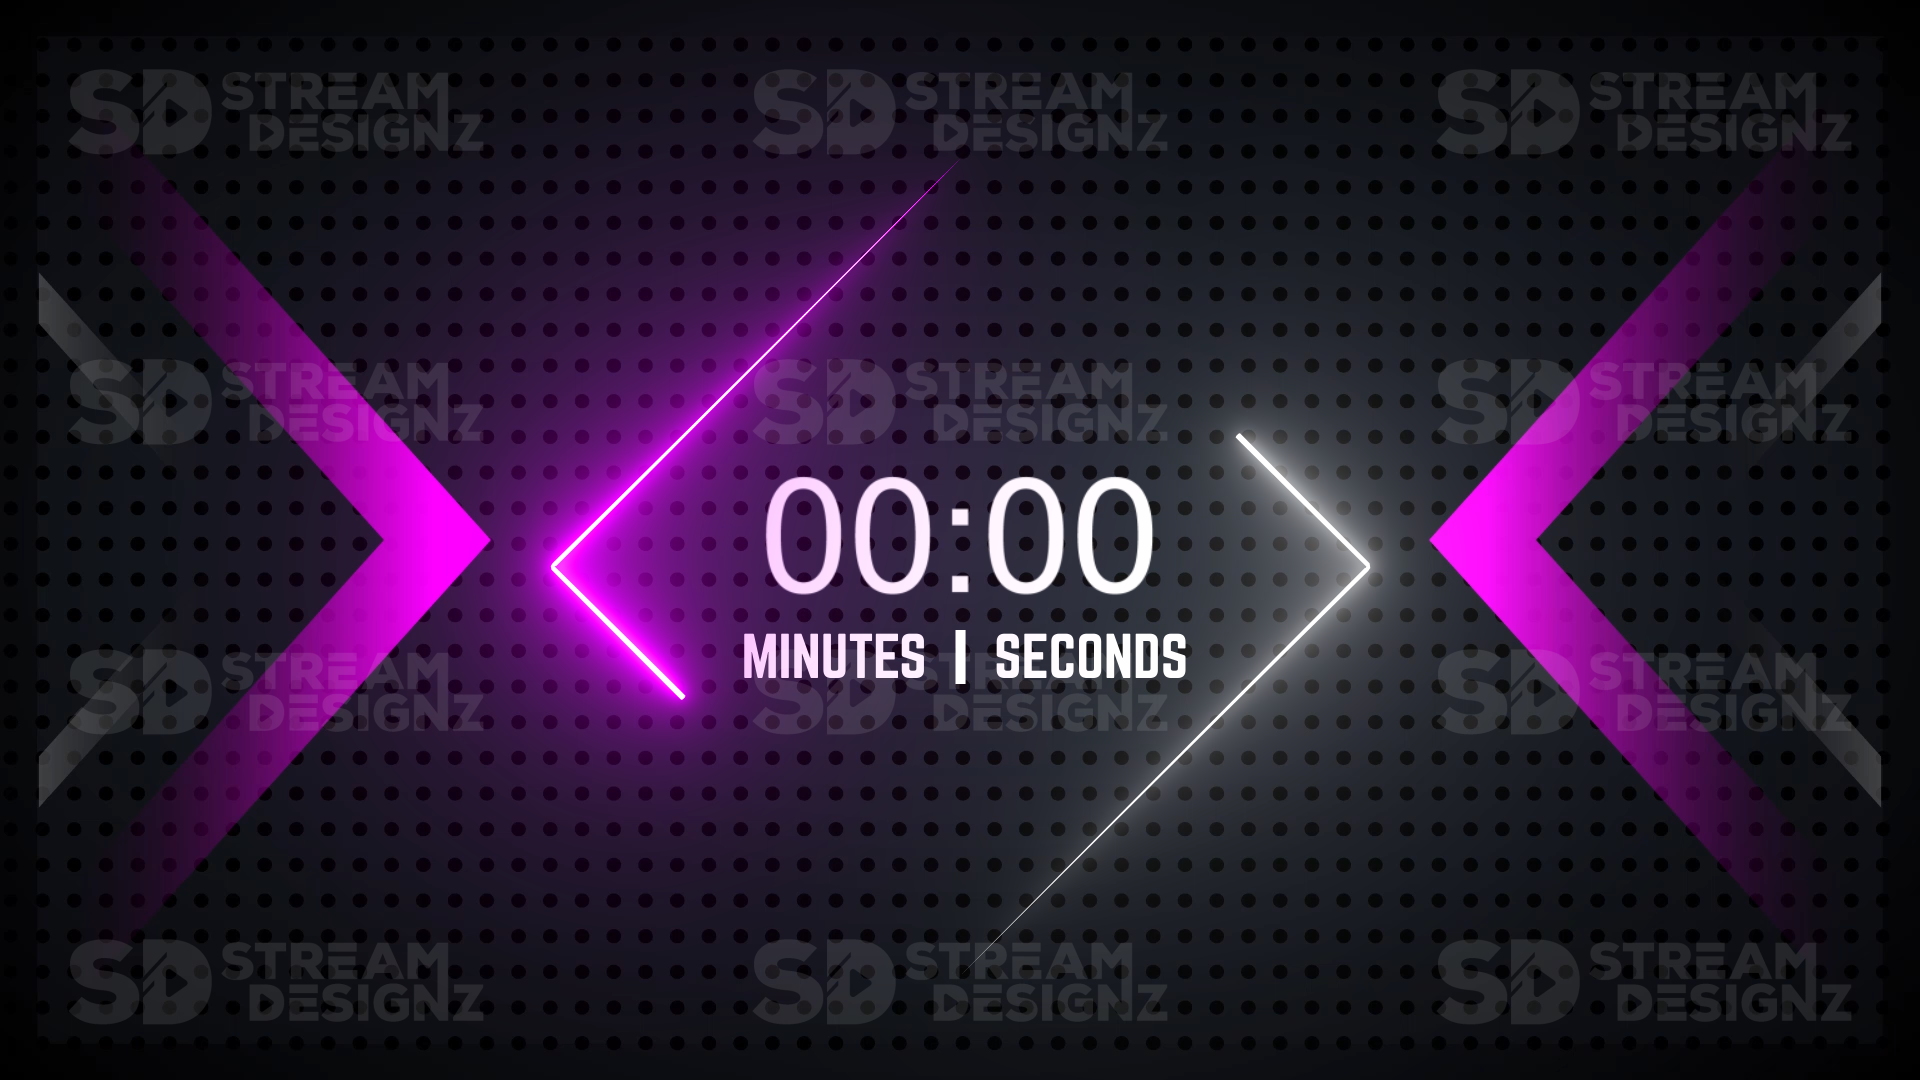 5 minute count up timer thumbnail pink fury stream designz